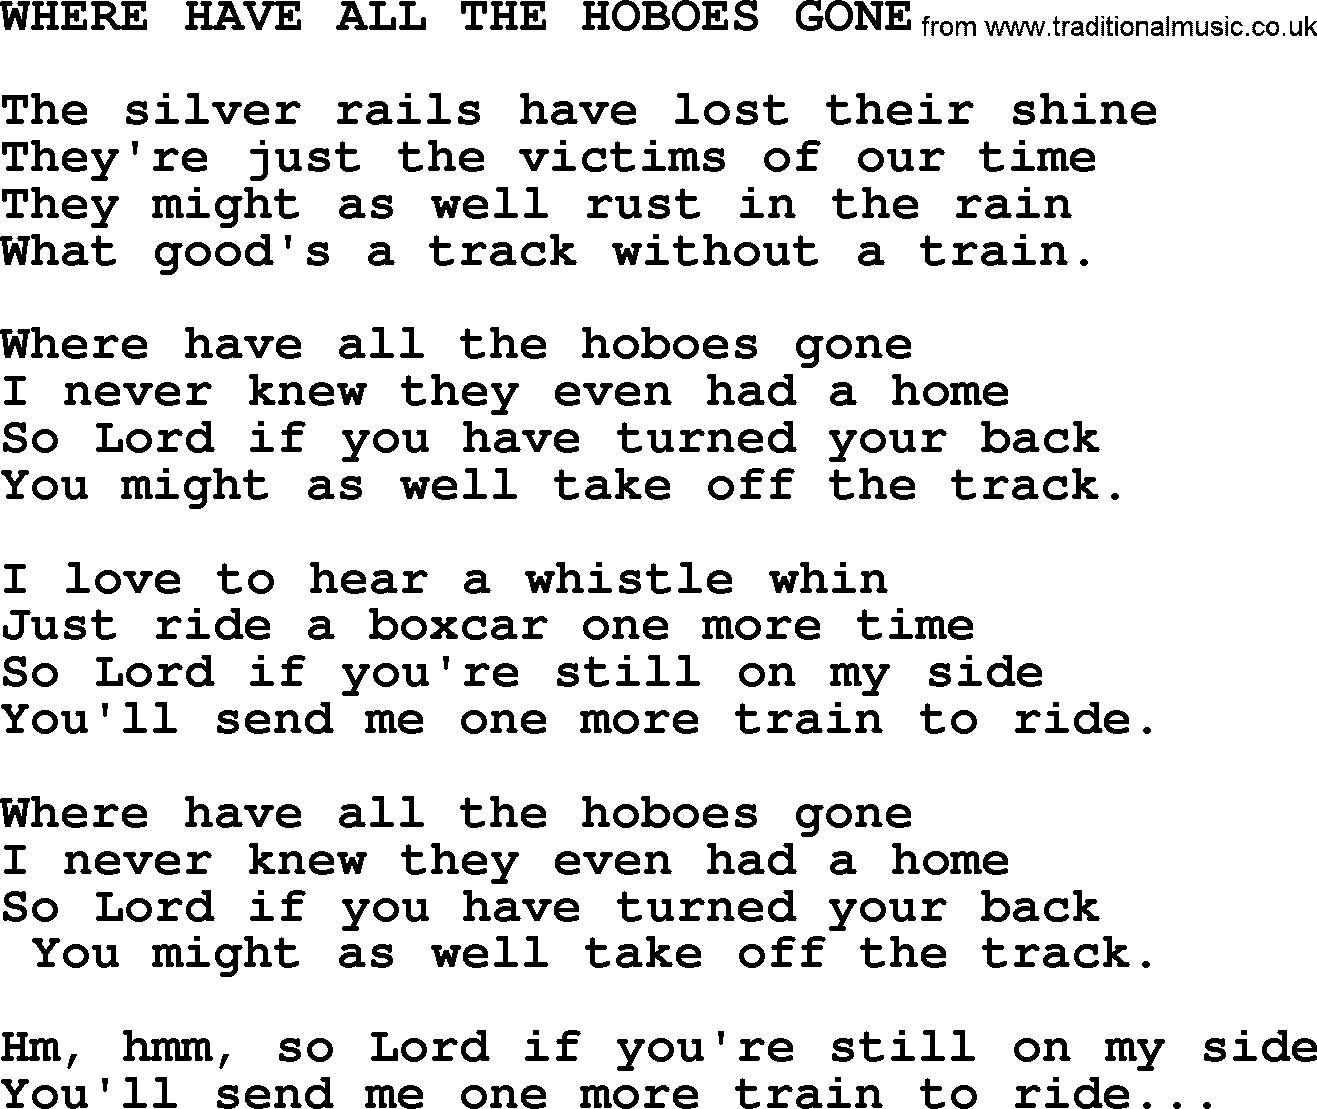 Merle Haggard song: Where Have All The Hoboes Gone, lyrics.